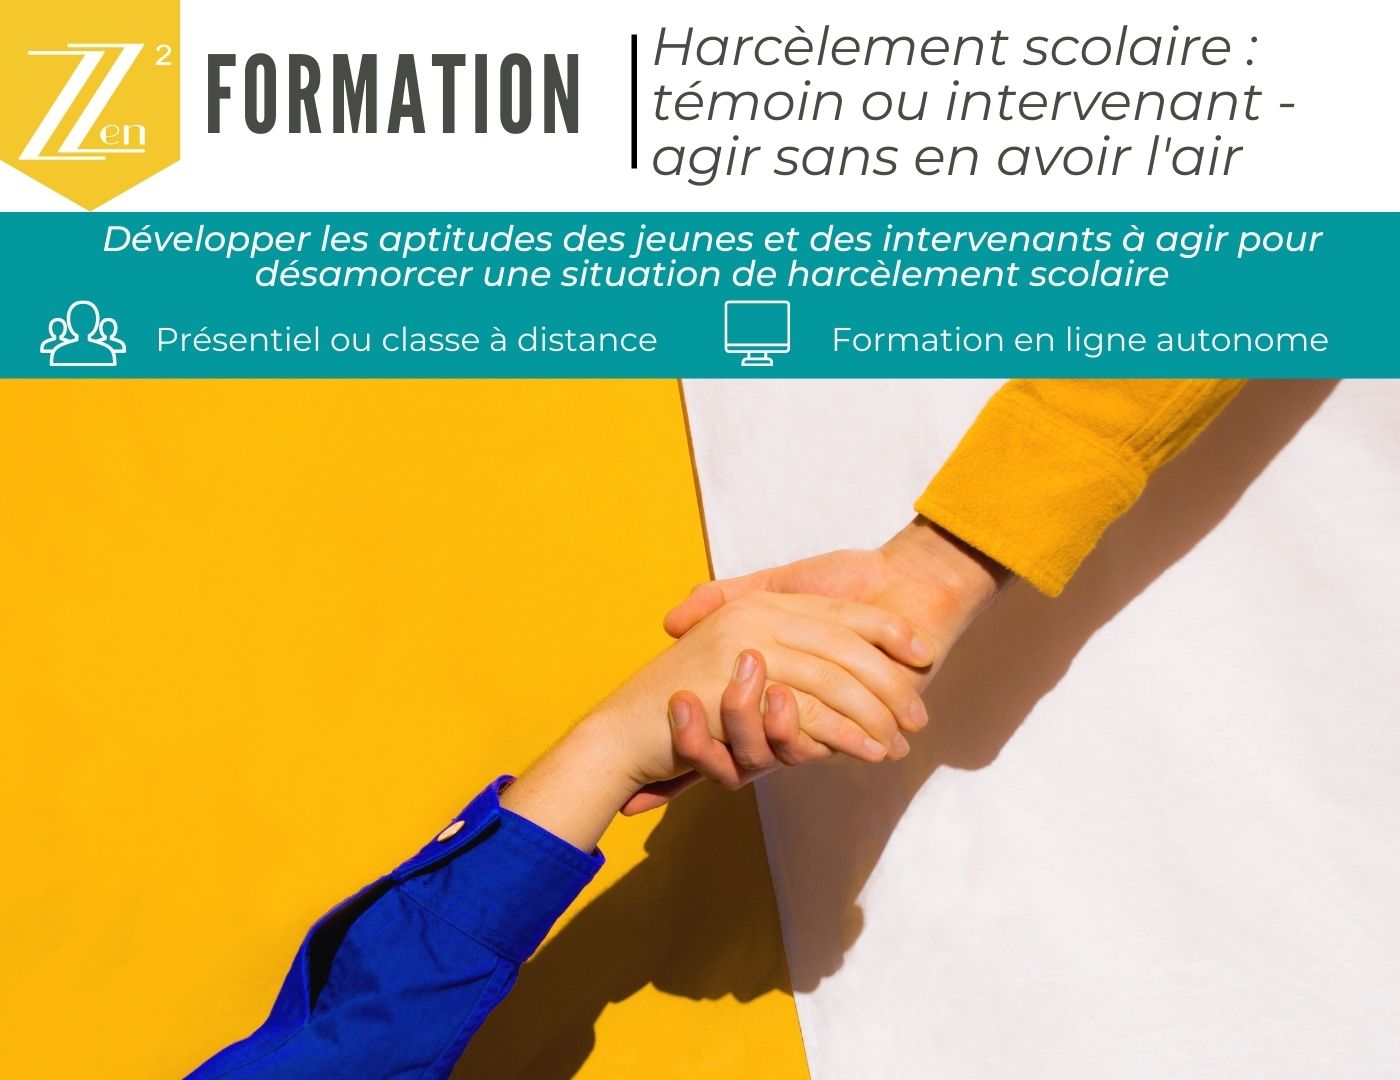 formations-temoin-harcelement-scolaire